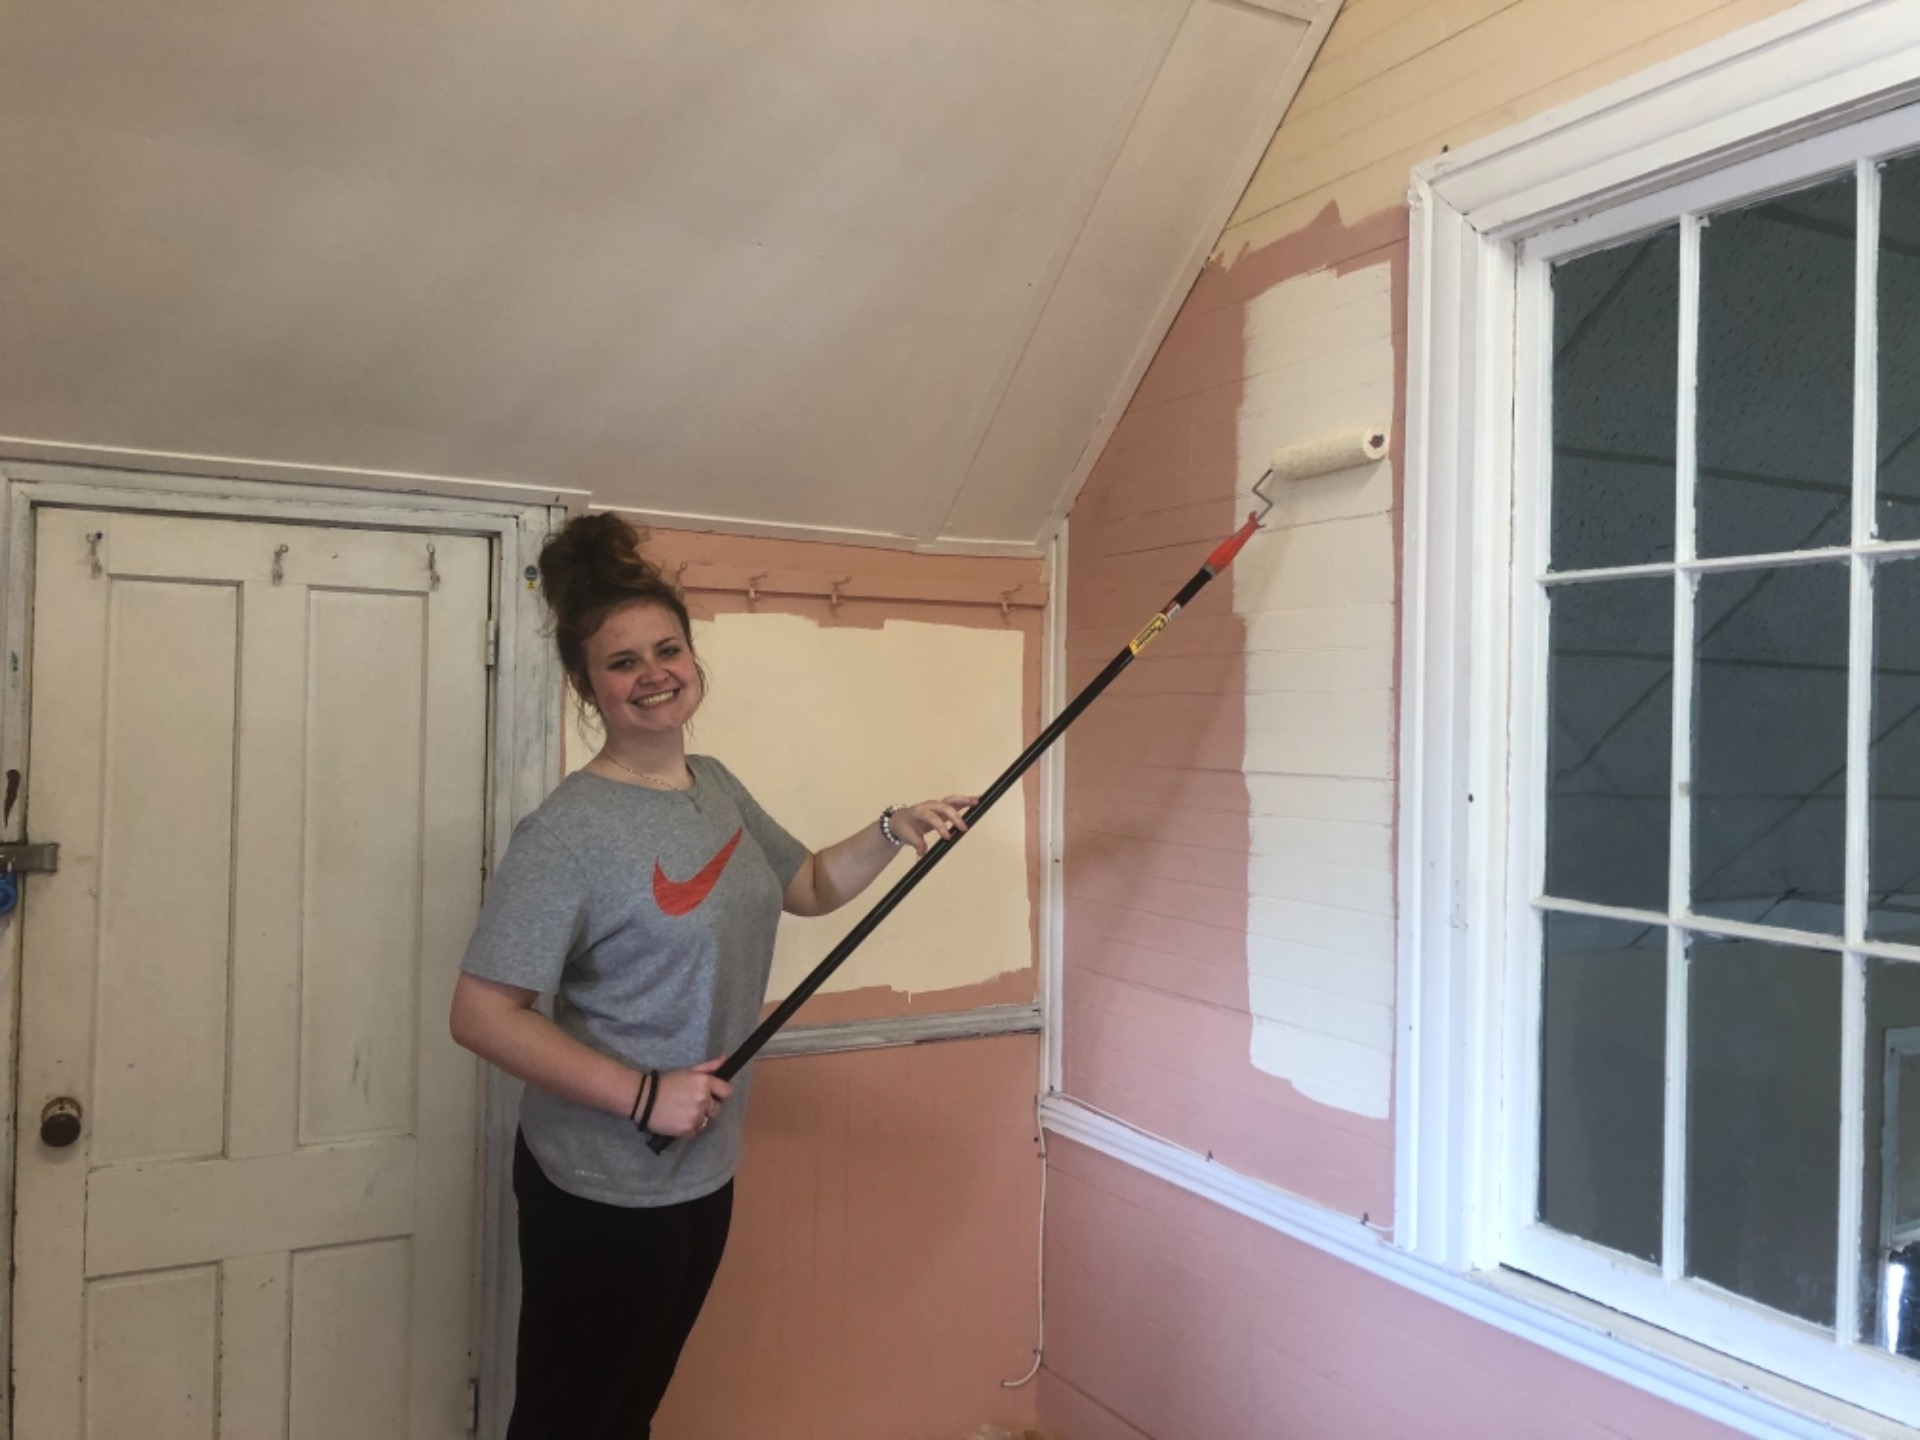 Painting the Kid’s Room